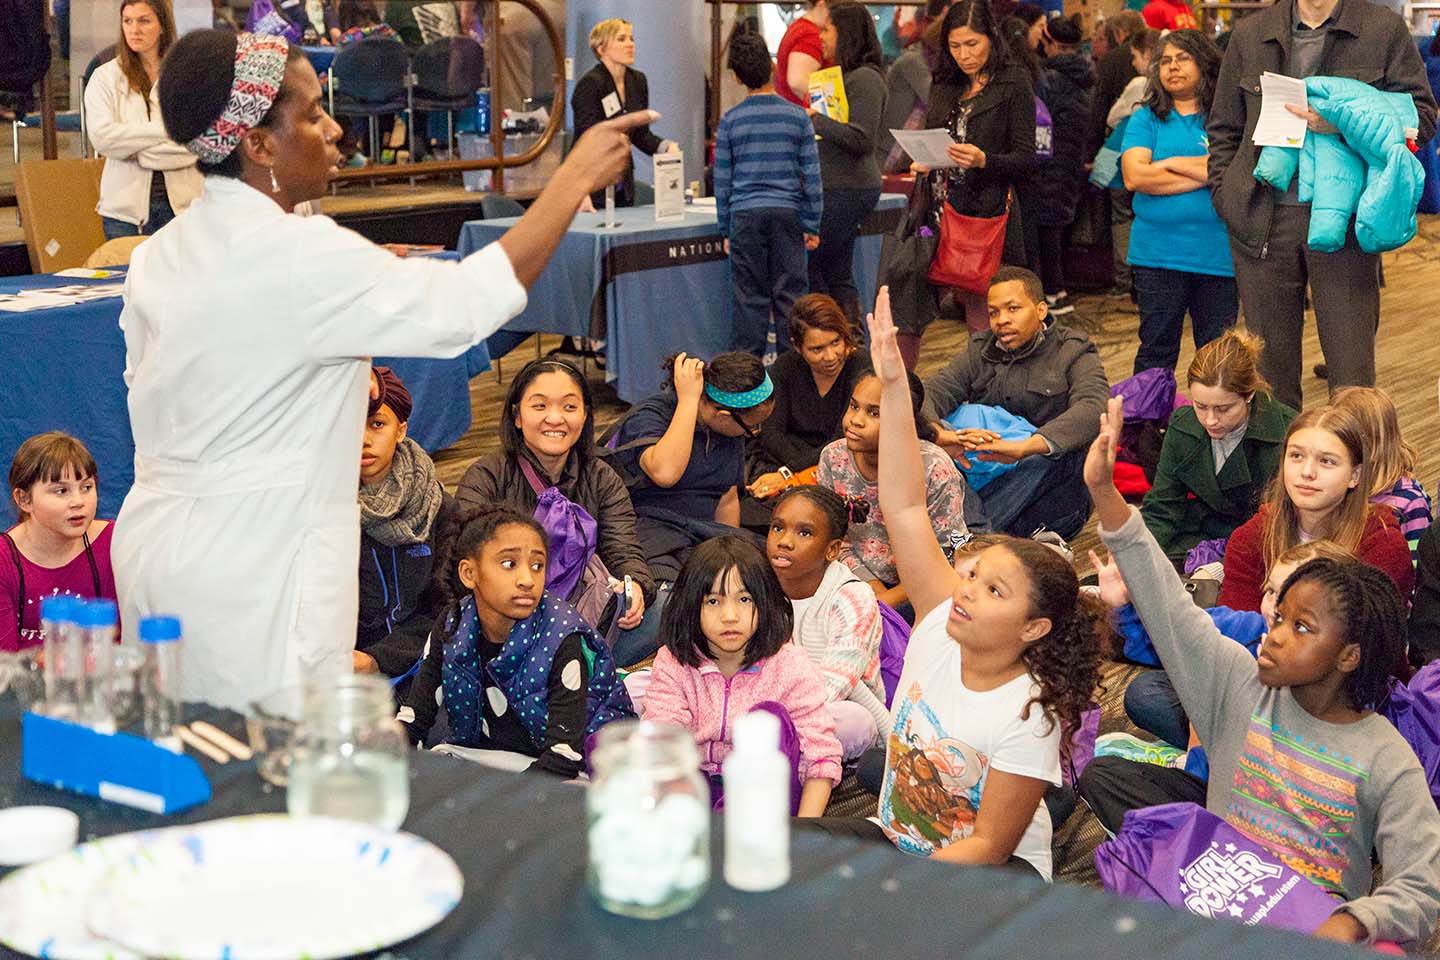 Girl Power 2017 attendees participated in an “Eric Energy” demonstration.